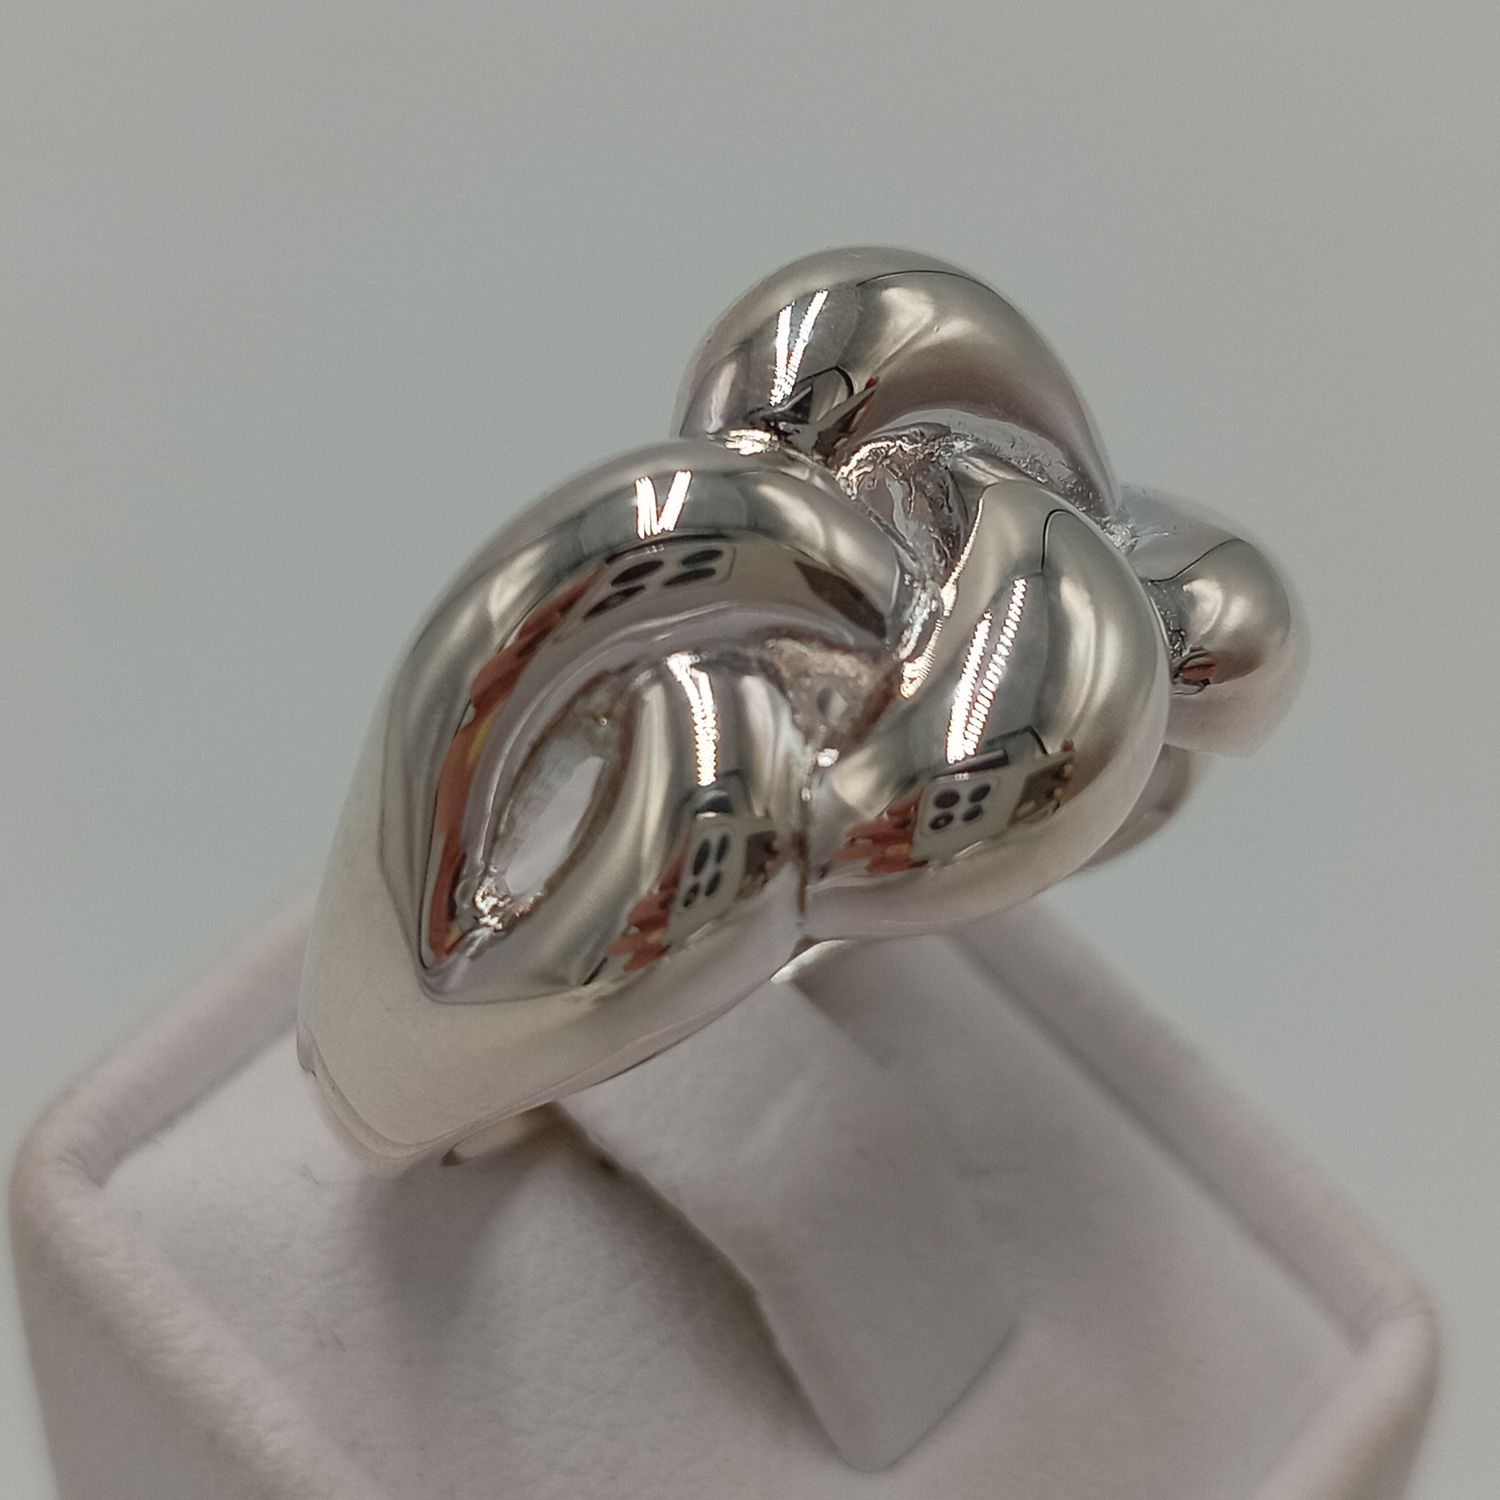 Beautiful braid design sterling silver ring - size T - 7.5g